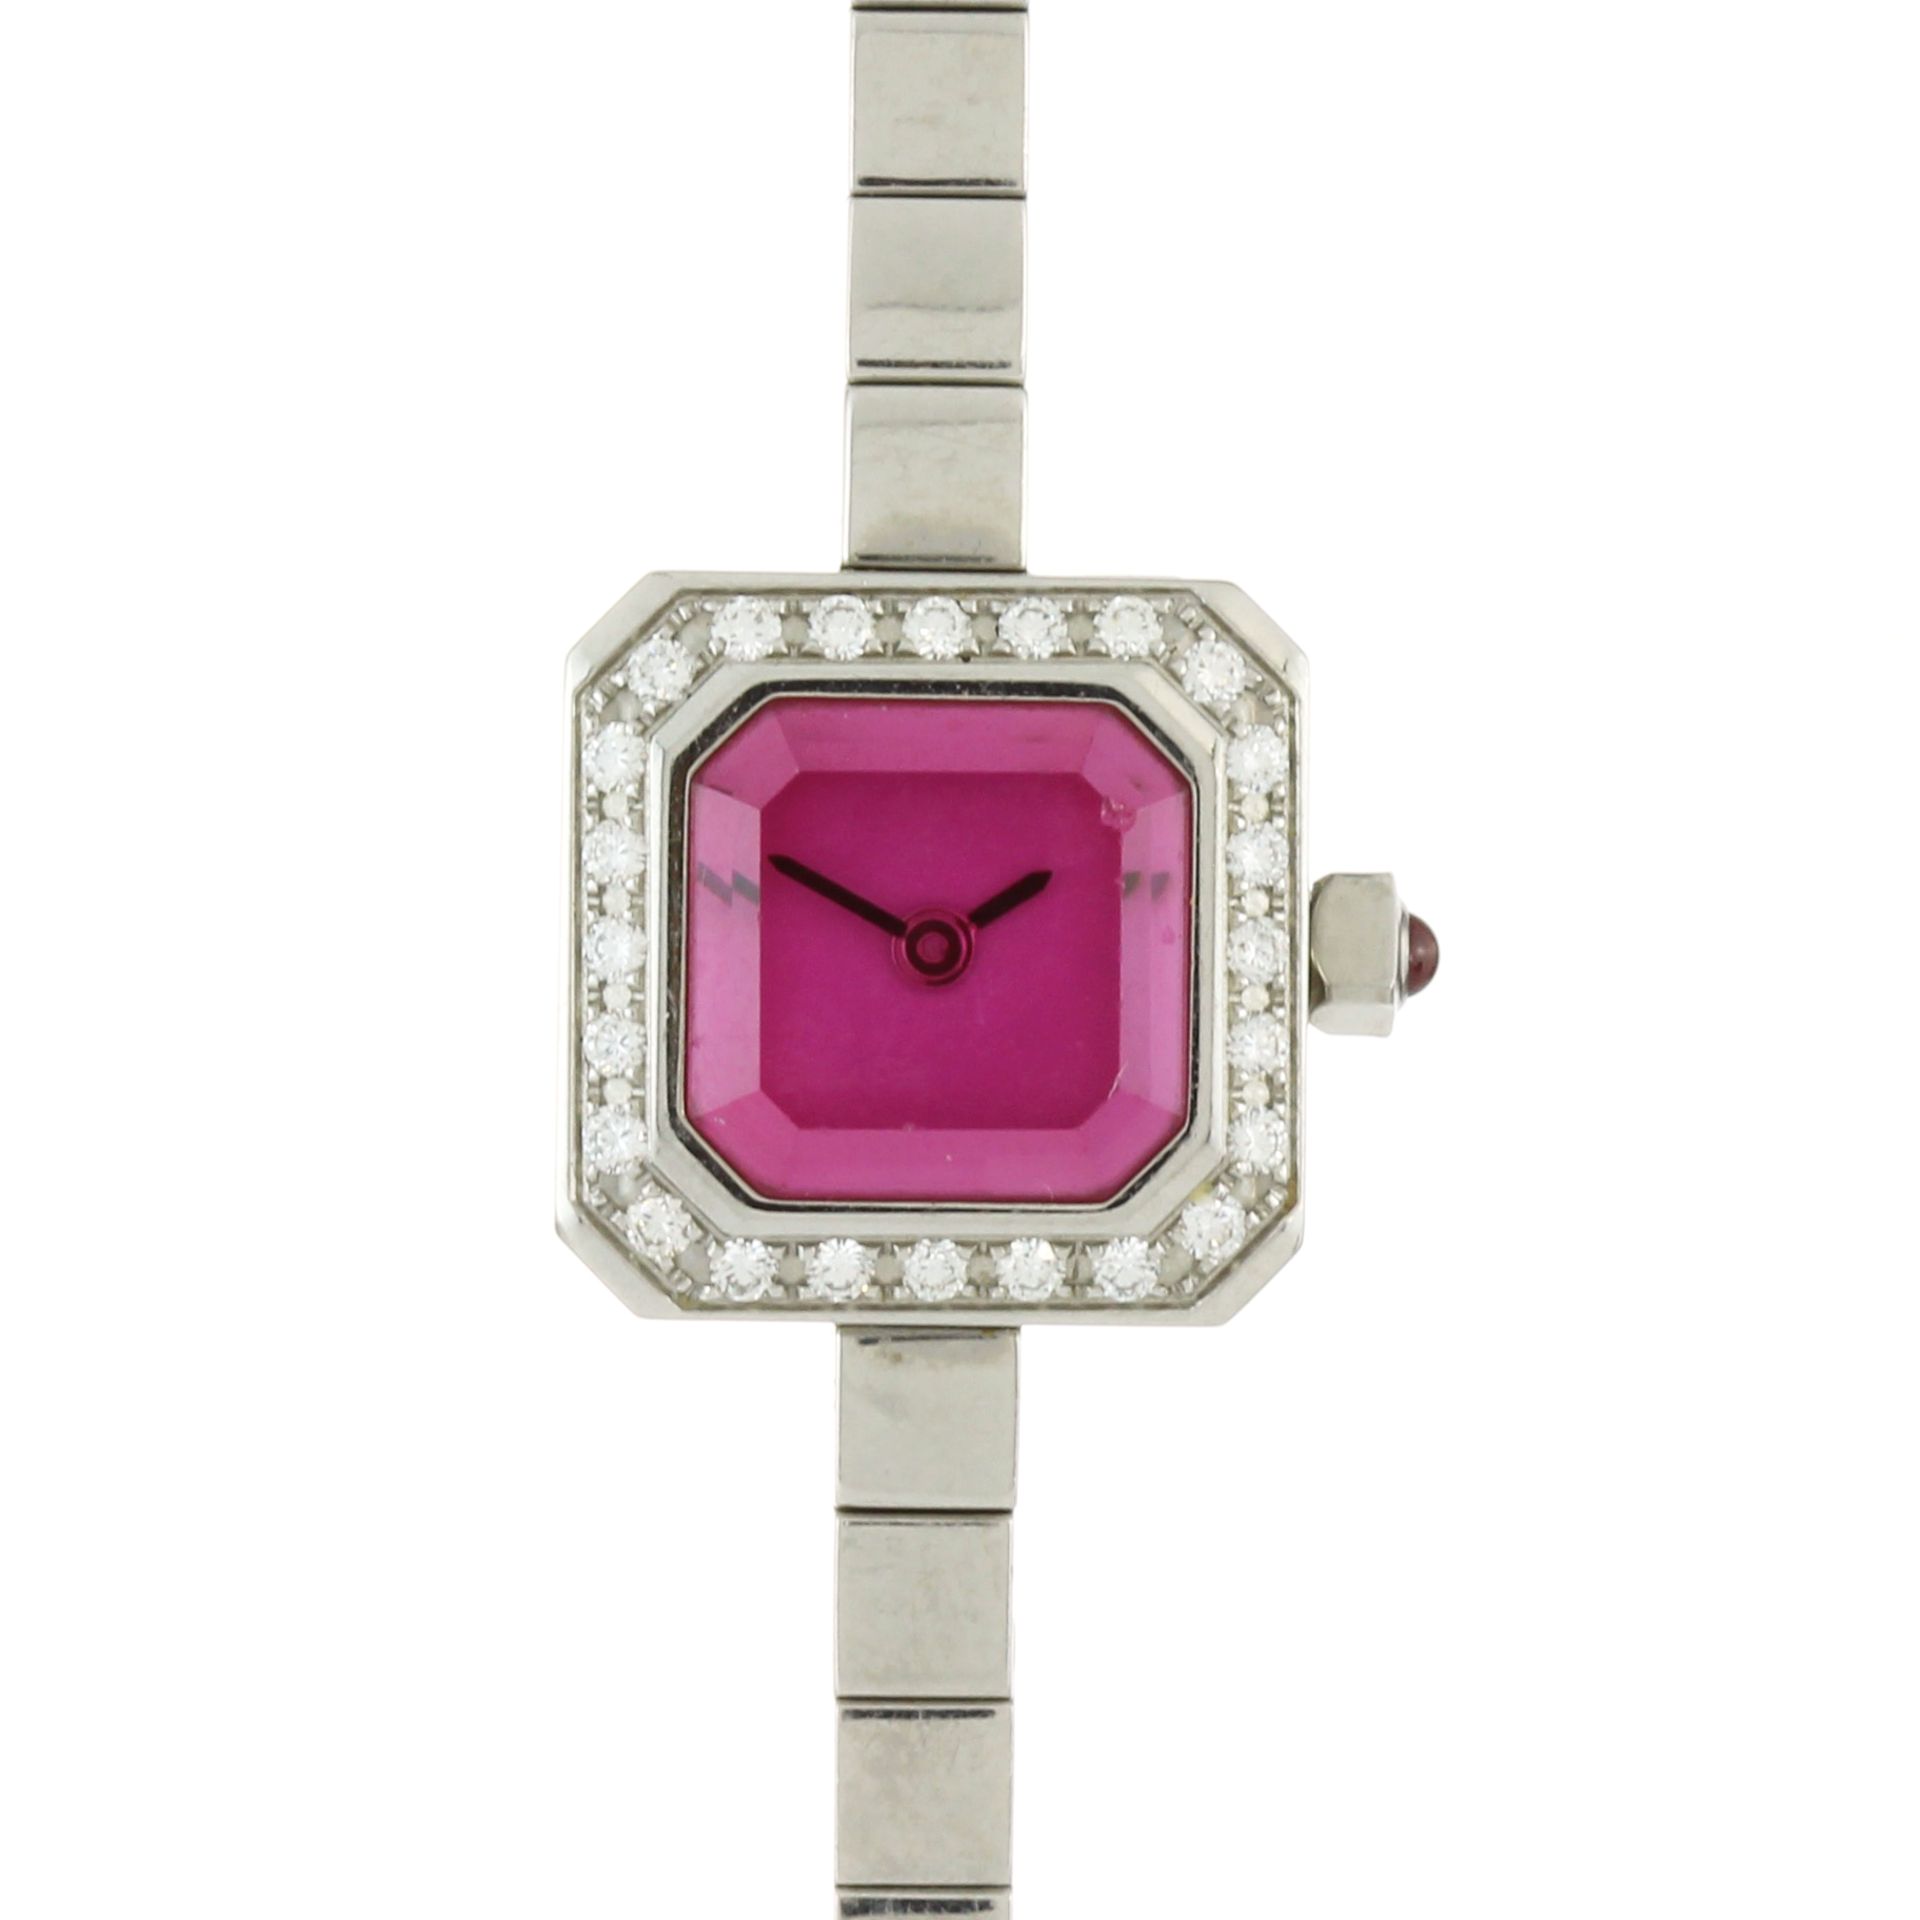 A stainless steel sugar cube wristwatch by Corum with pink face and jewelled with white sapphires.